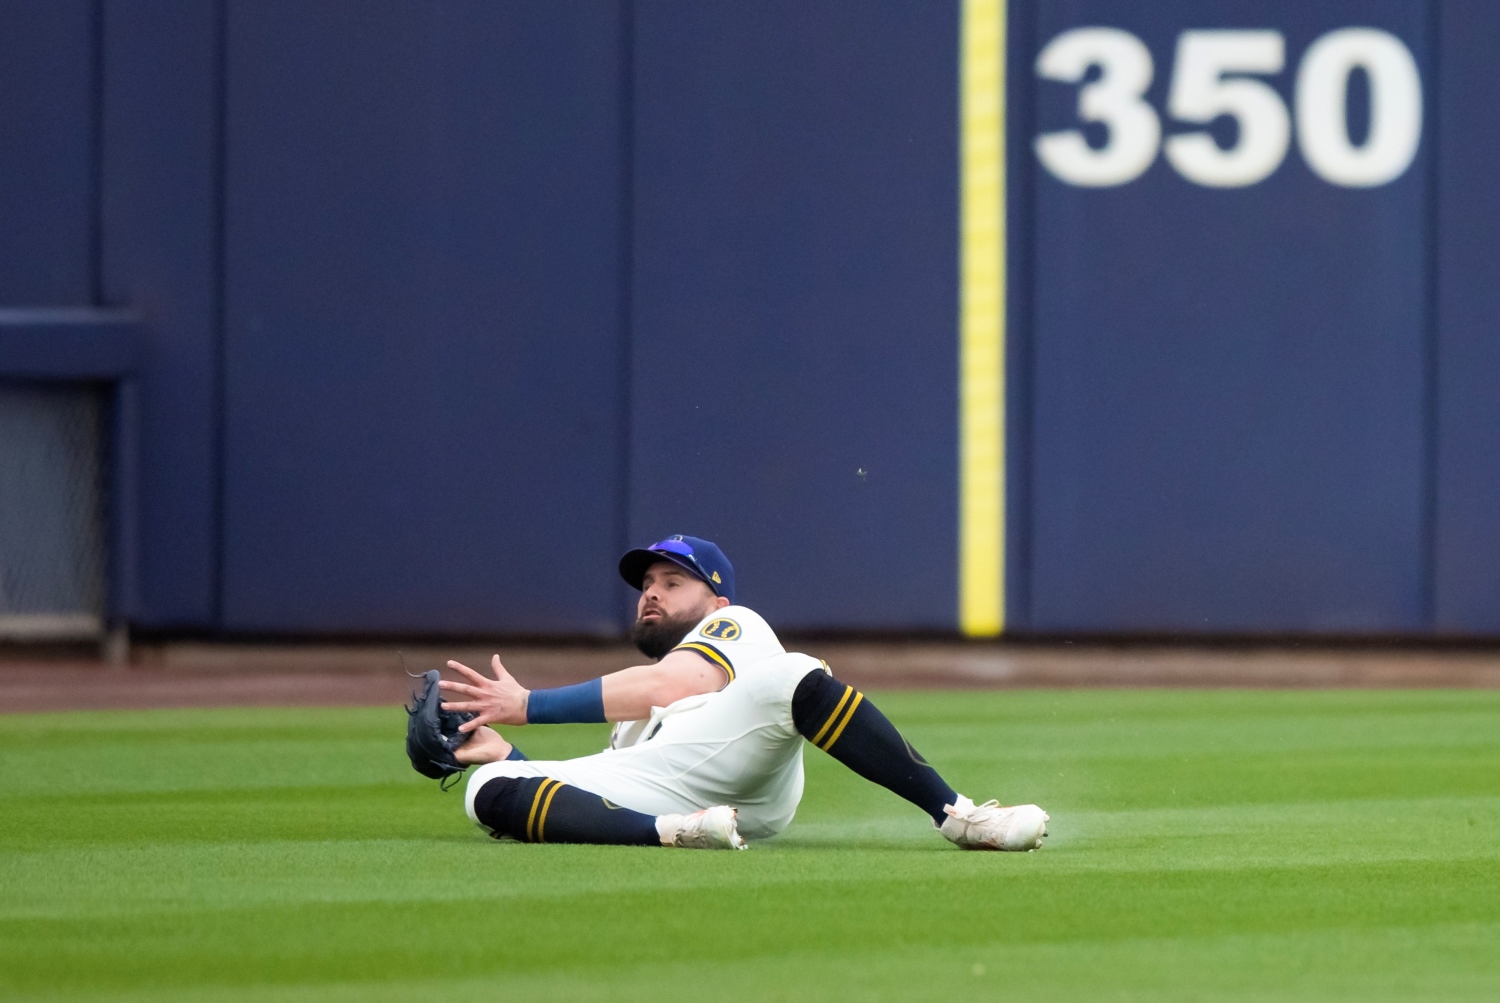 What's With Jesse Winker? - Brewers - Brewer Fanatic